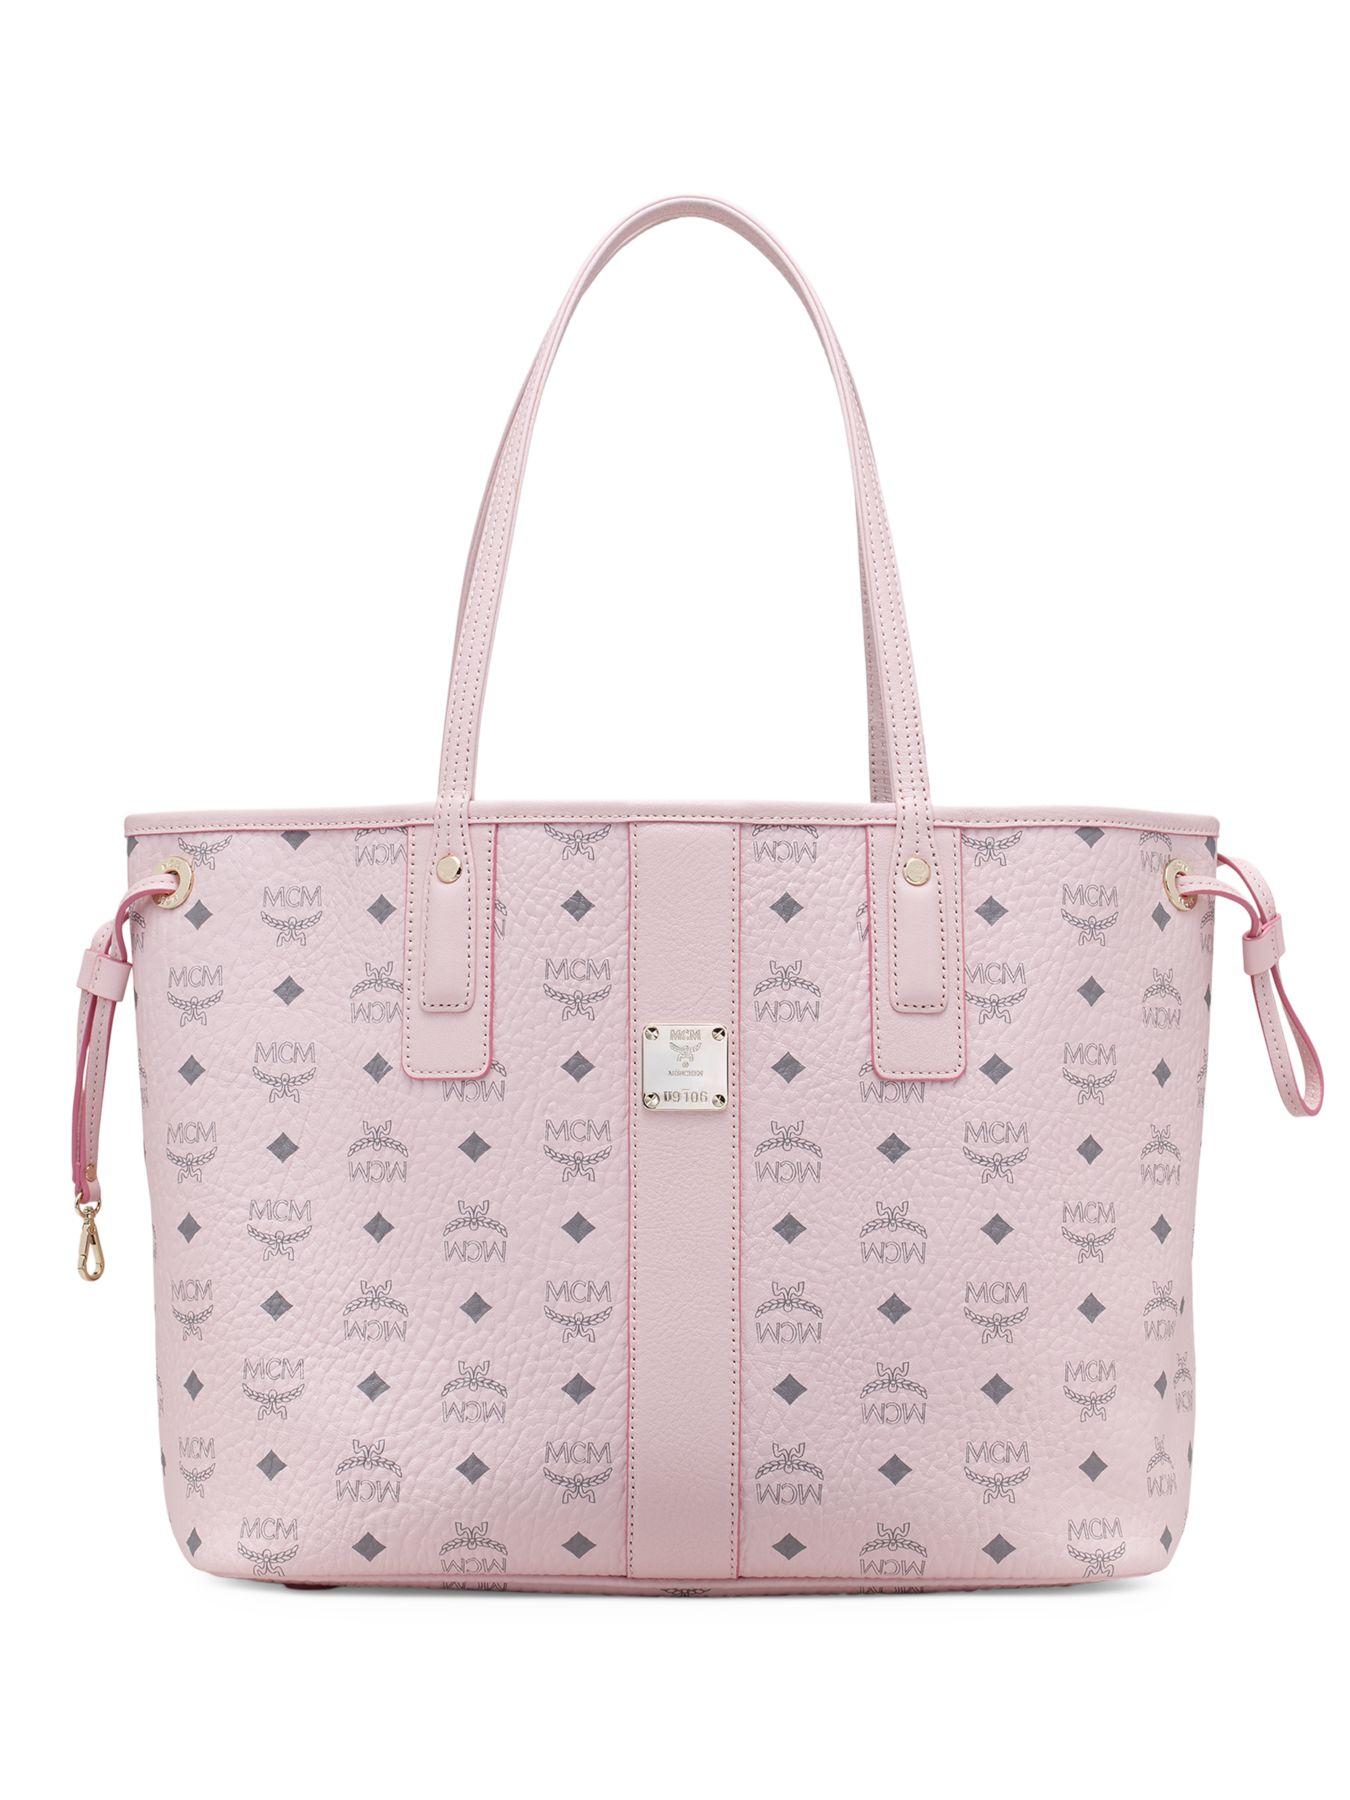 MCM Tote Pink Bags & Handbags for Women for sale